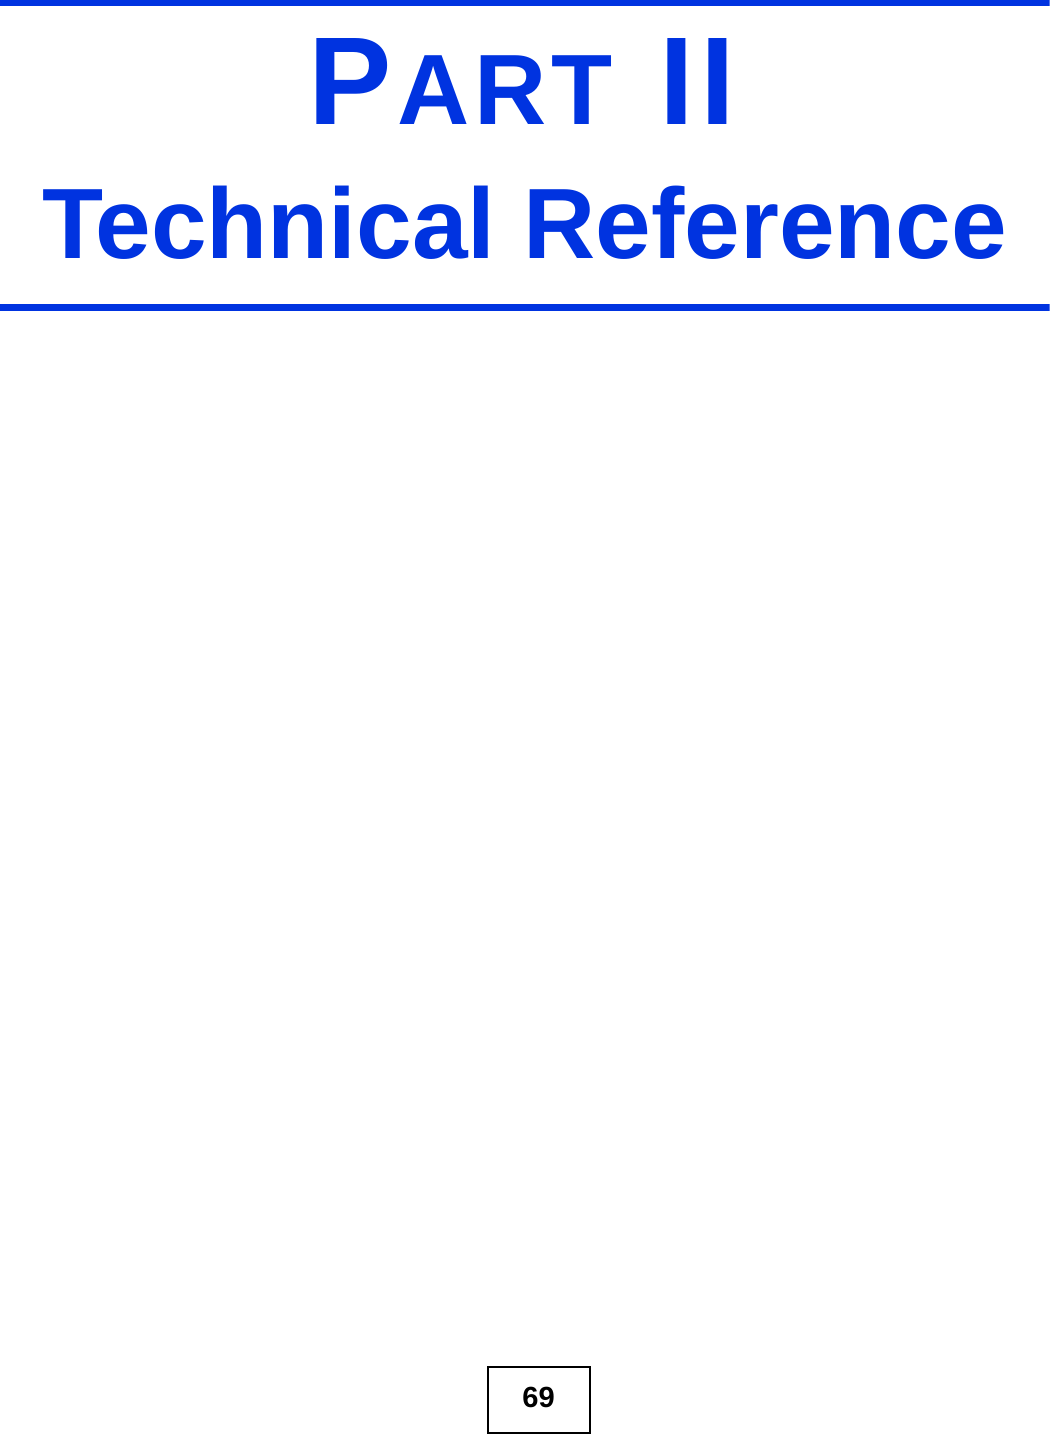 69PART IITechnical Reference